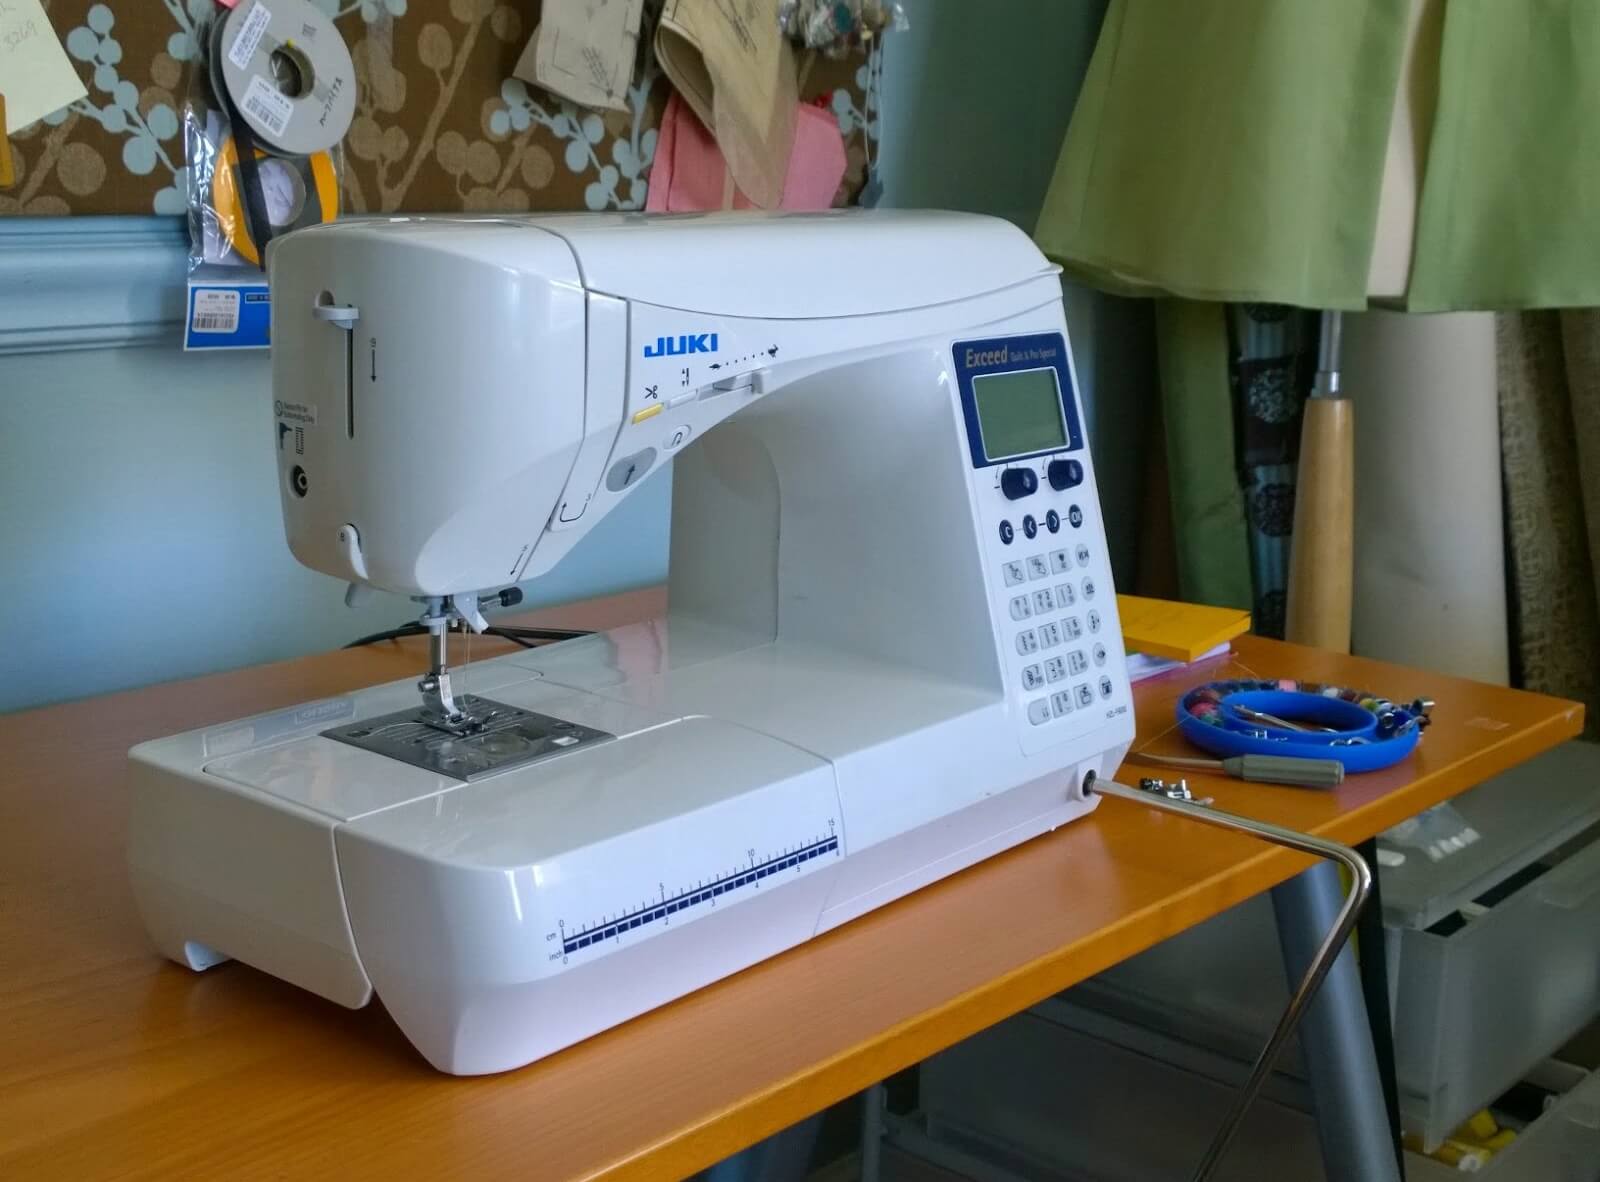 11 Best Intermediate Sewing Machines Reviewed and Rated (Sept. 2020)